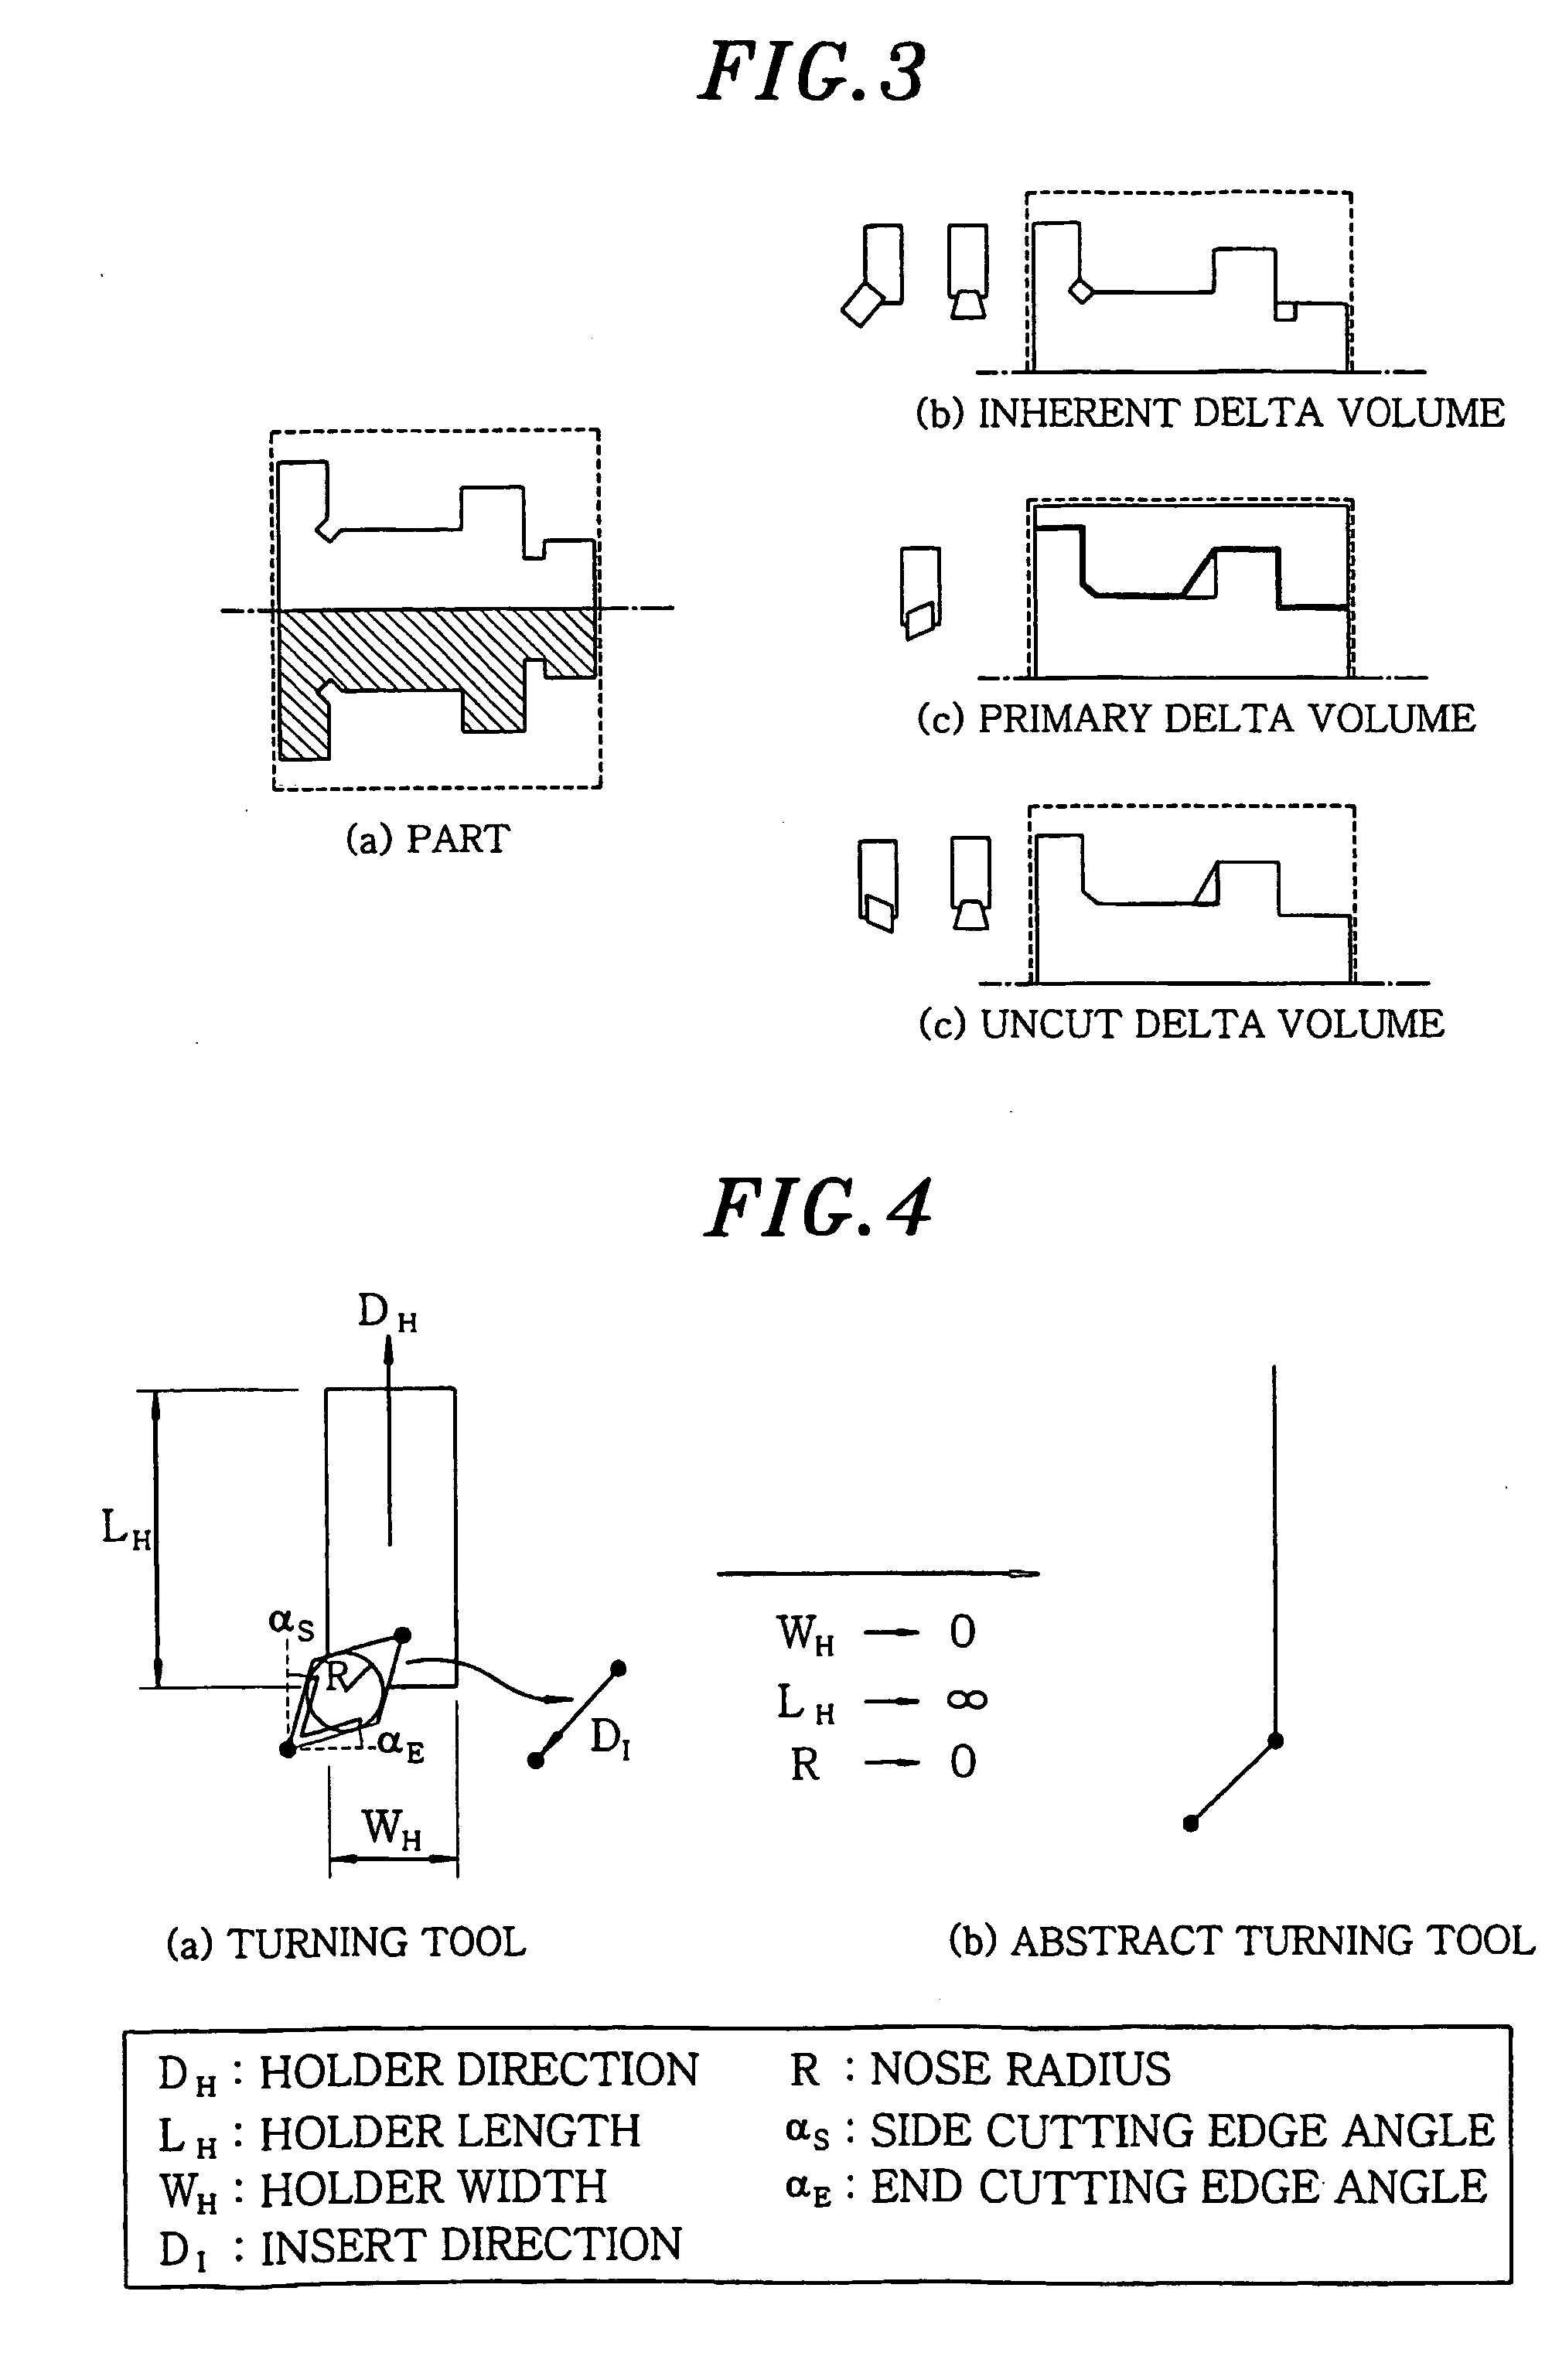 Method for performing delta volume decomposition and process planning in a turning step-nc system